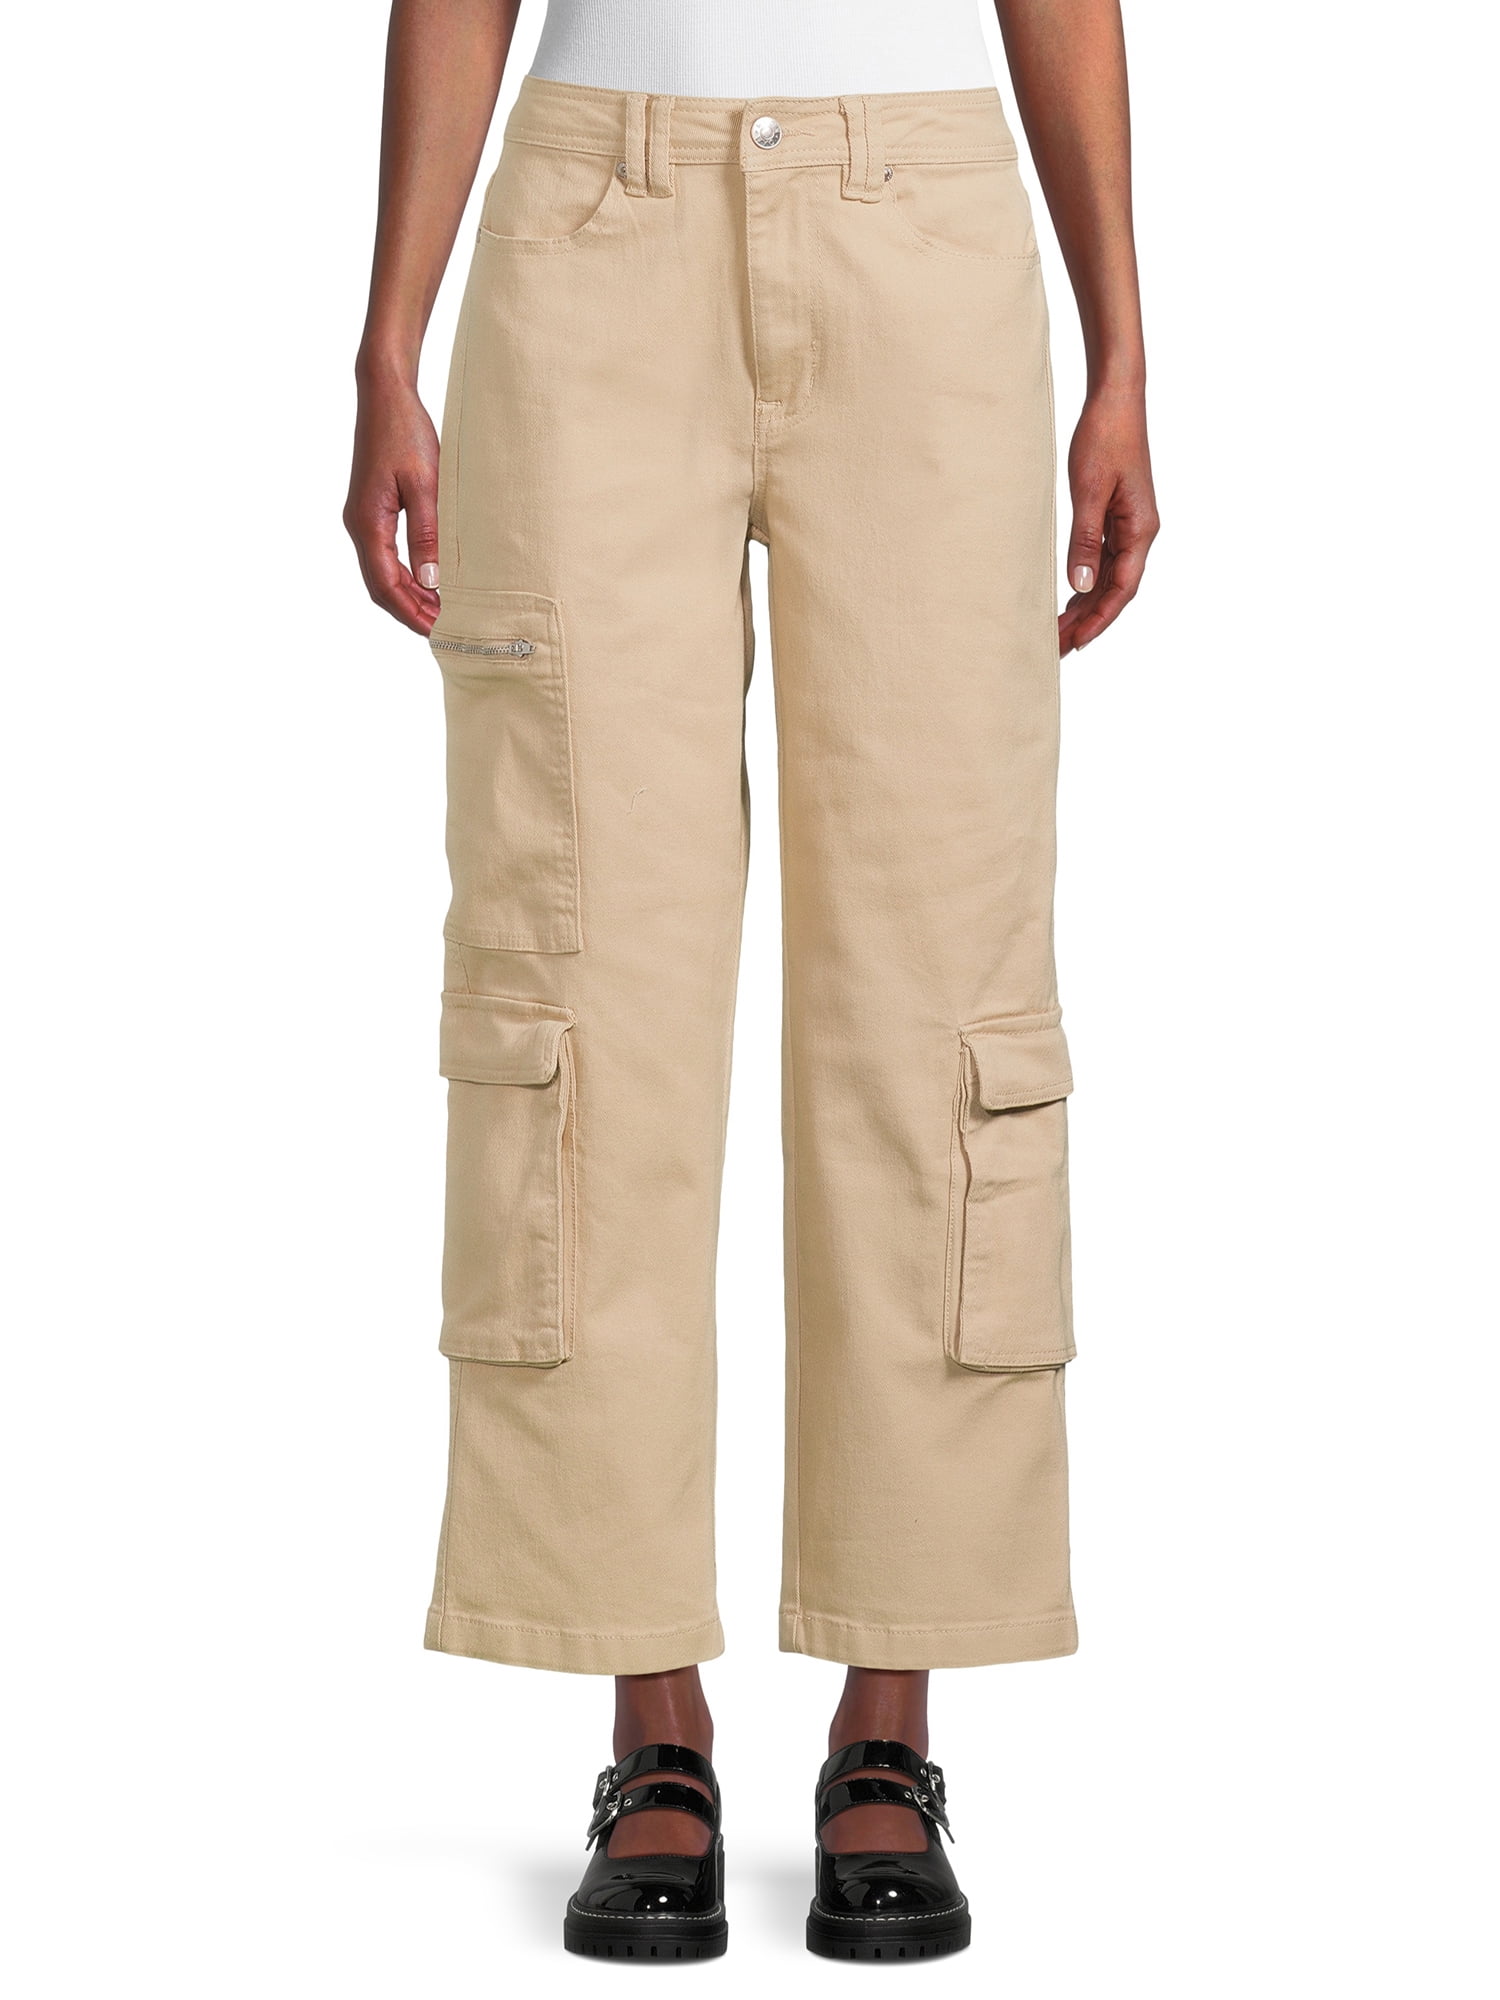 Madden NYC Juniors High Rise Cargo Pants, 29